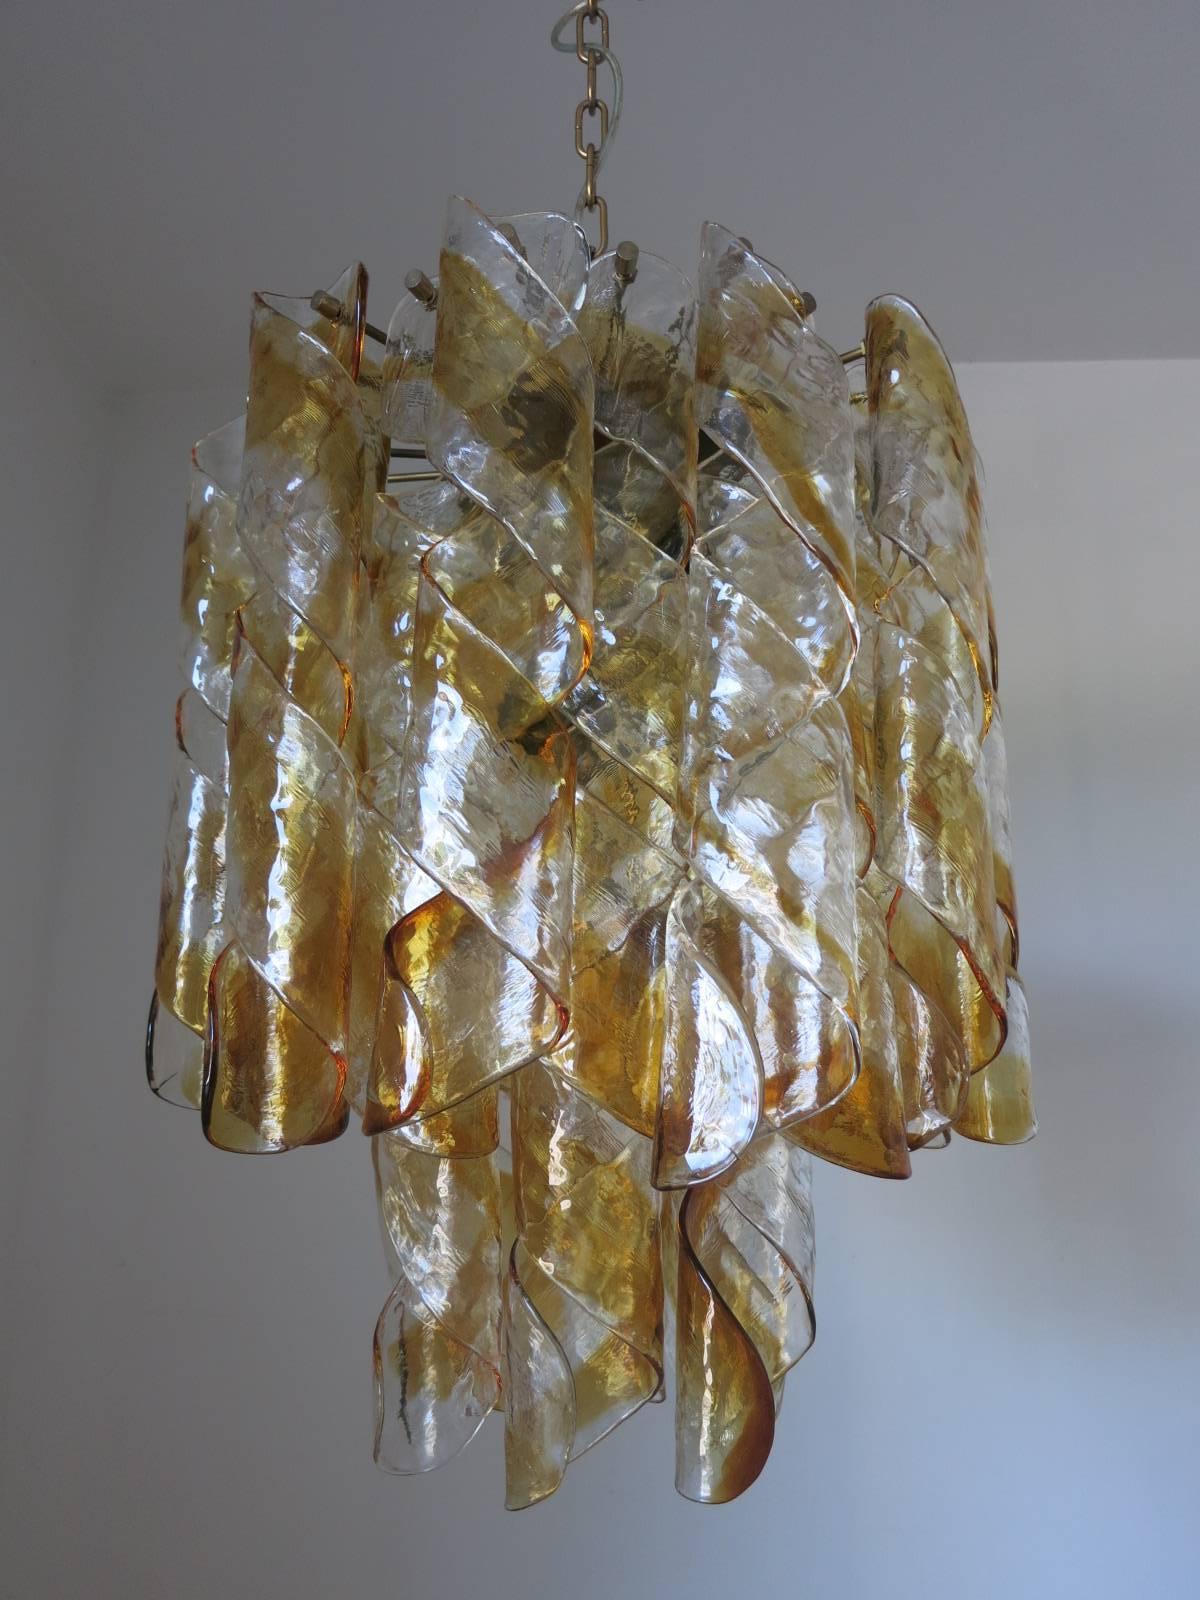 Vintage Italian chandelier with 32 clear and amber infused Murano glasses blown into twisted spiral shapes, mounted on brass metal frame / Designed by Mazzega circa 1960’s / Made in Italy 
7 lights / E26 or E27 type / max 60W each
Diameter: 18